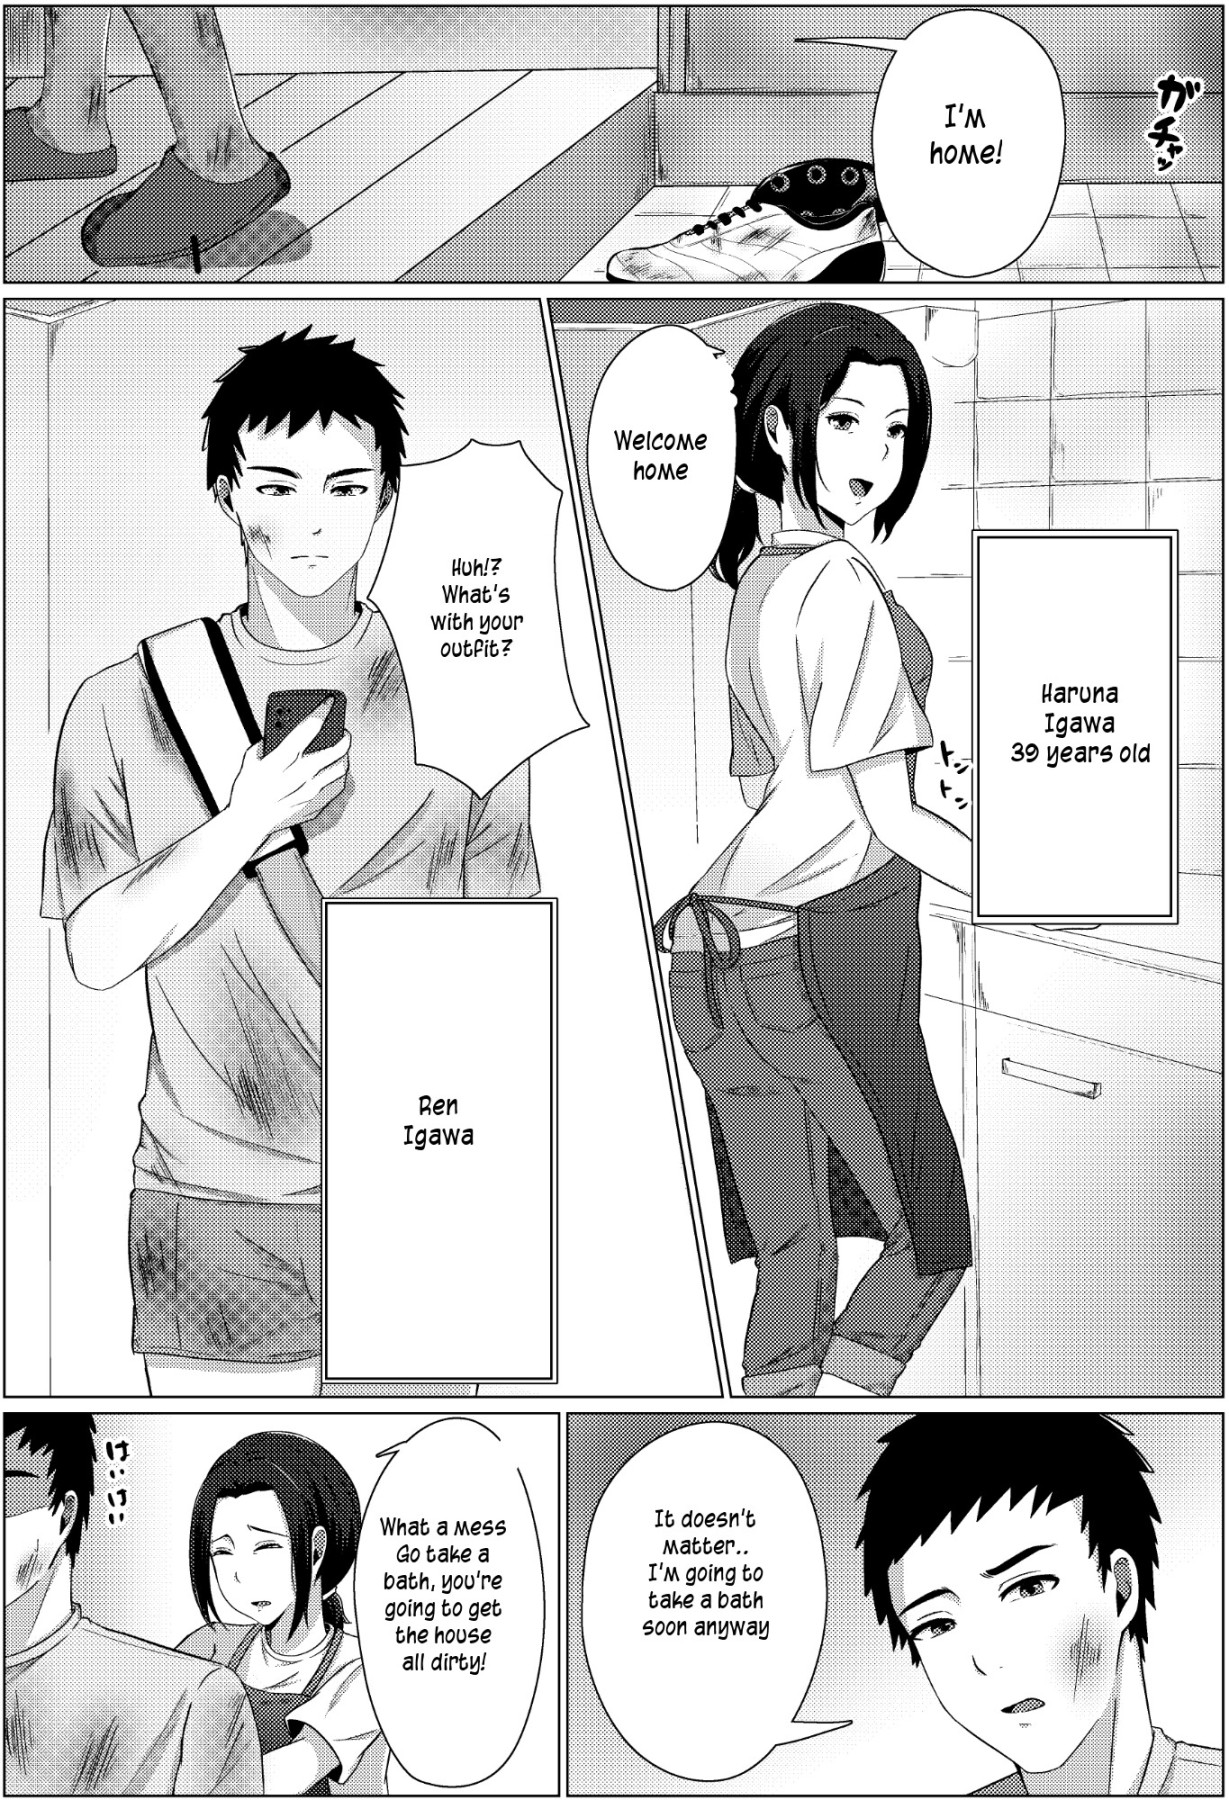 Hentai Manga Comic-Late Night Visit Leads Mother And Son To Marital Relations-Read-2